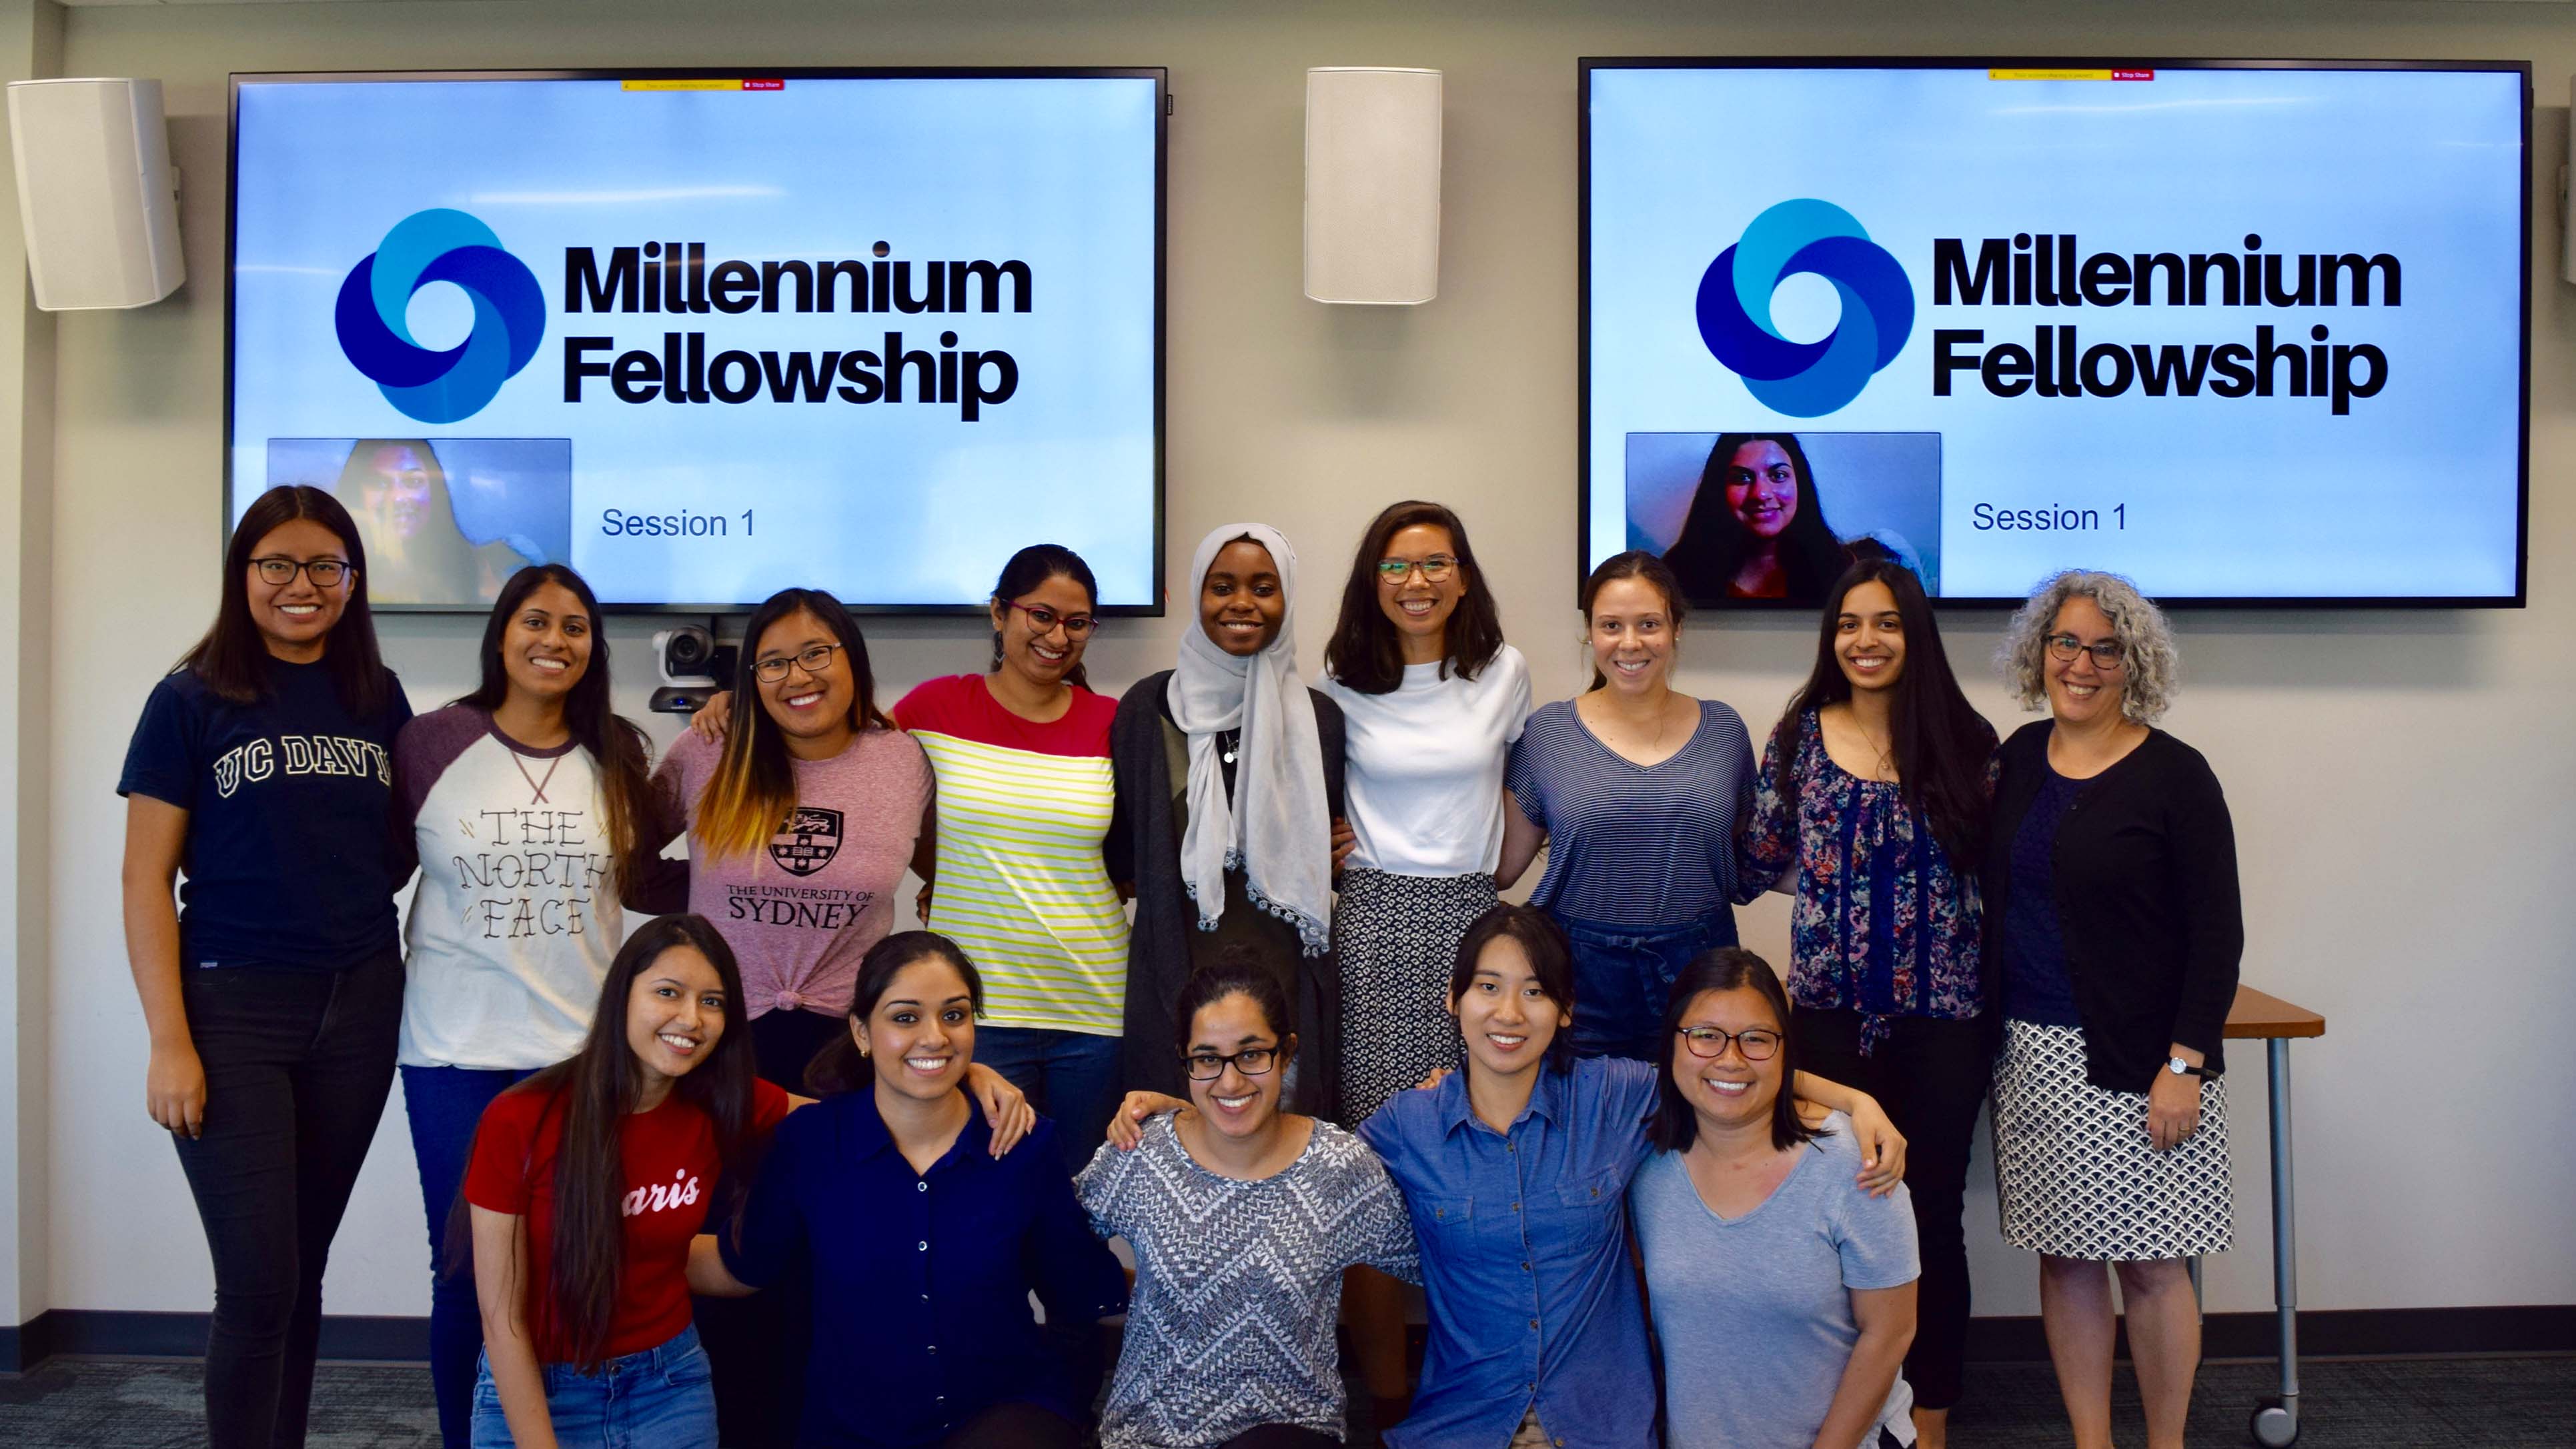 A group of students standing in front of two large conference room TV screens. On both screens: a image of the UN Millennium Fellowship program.